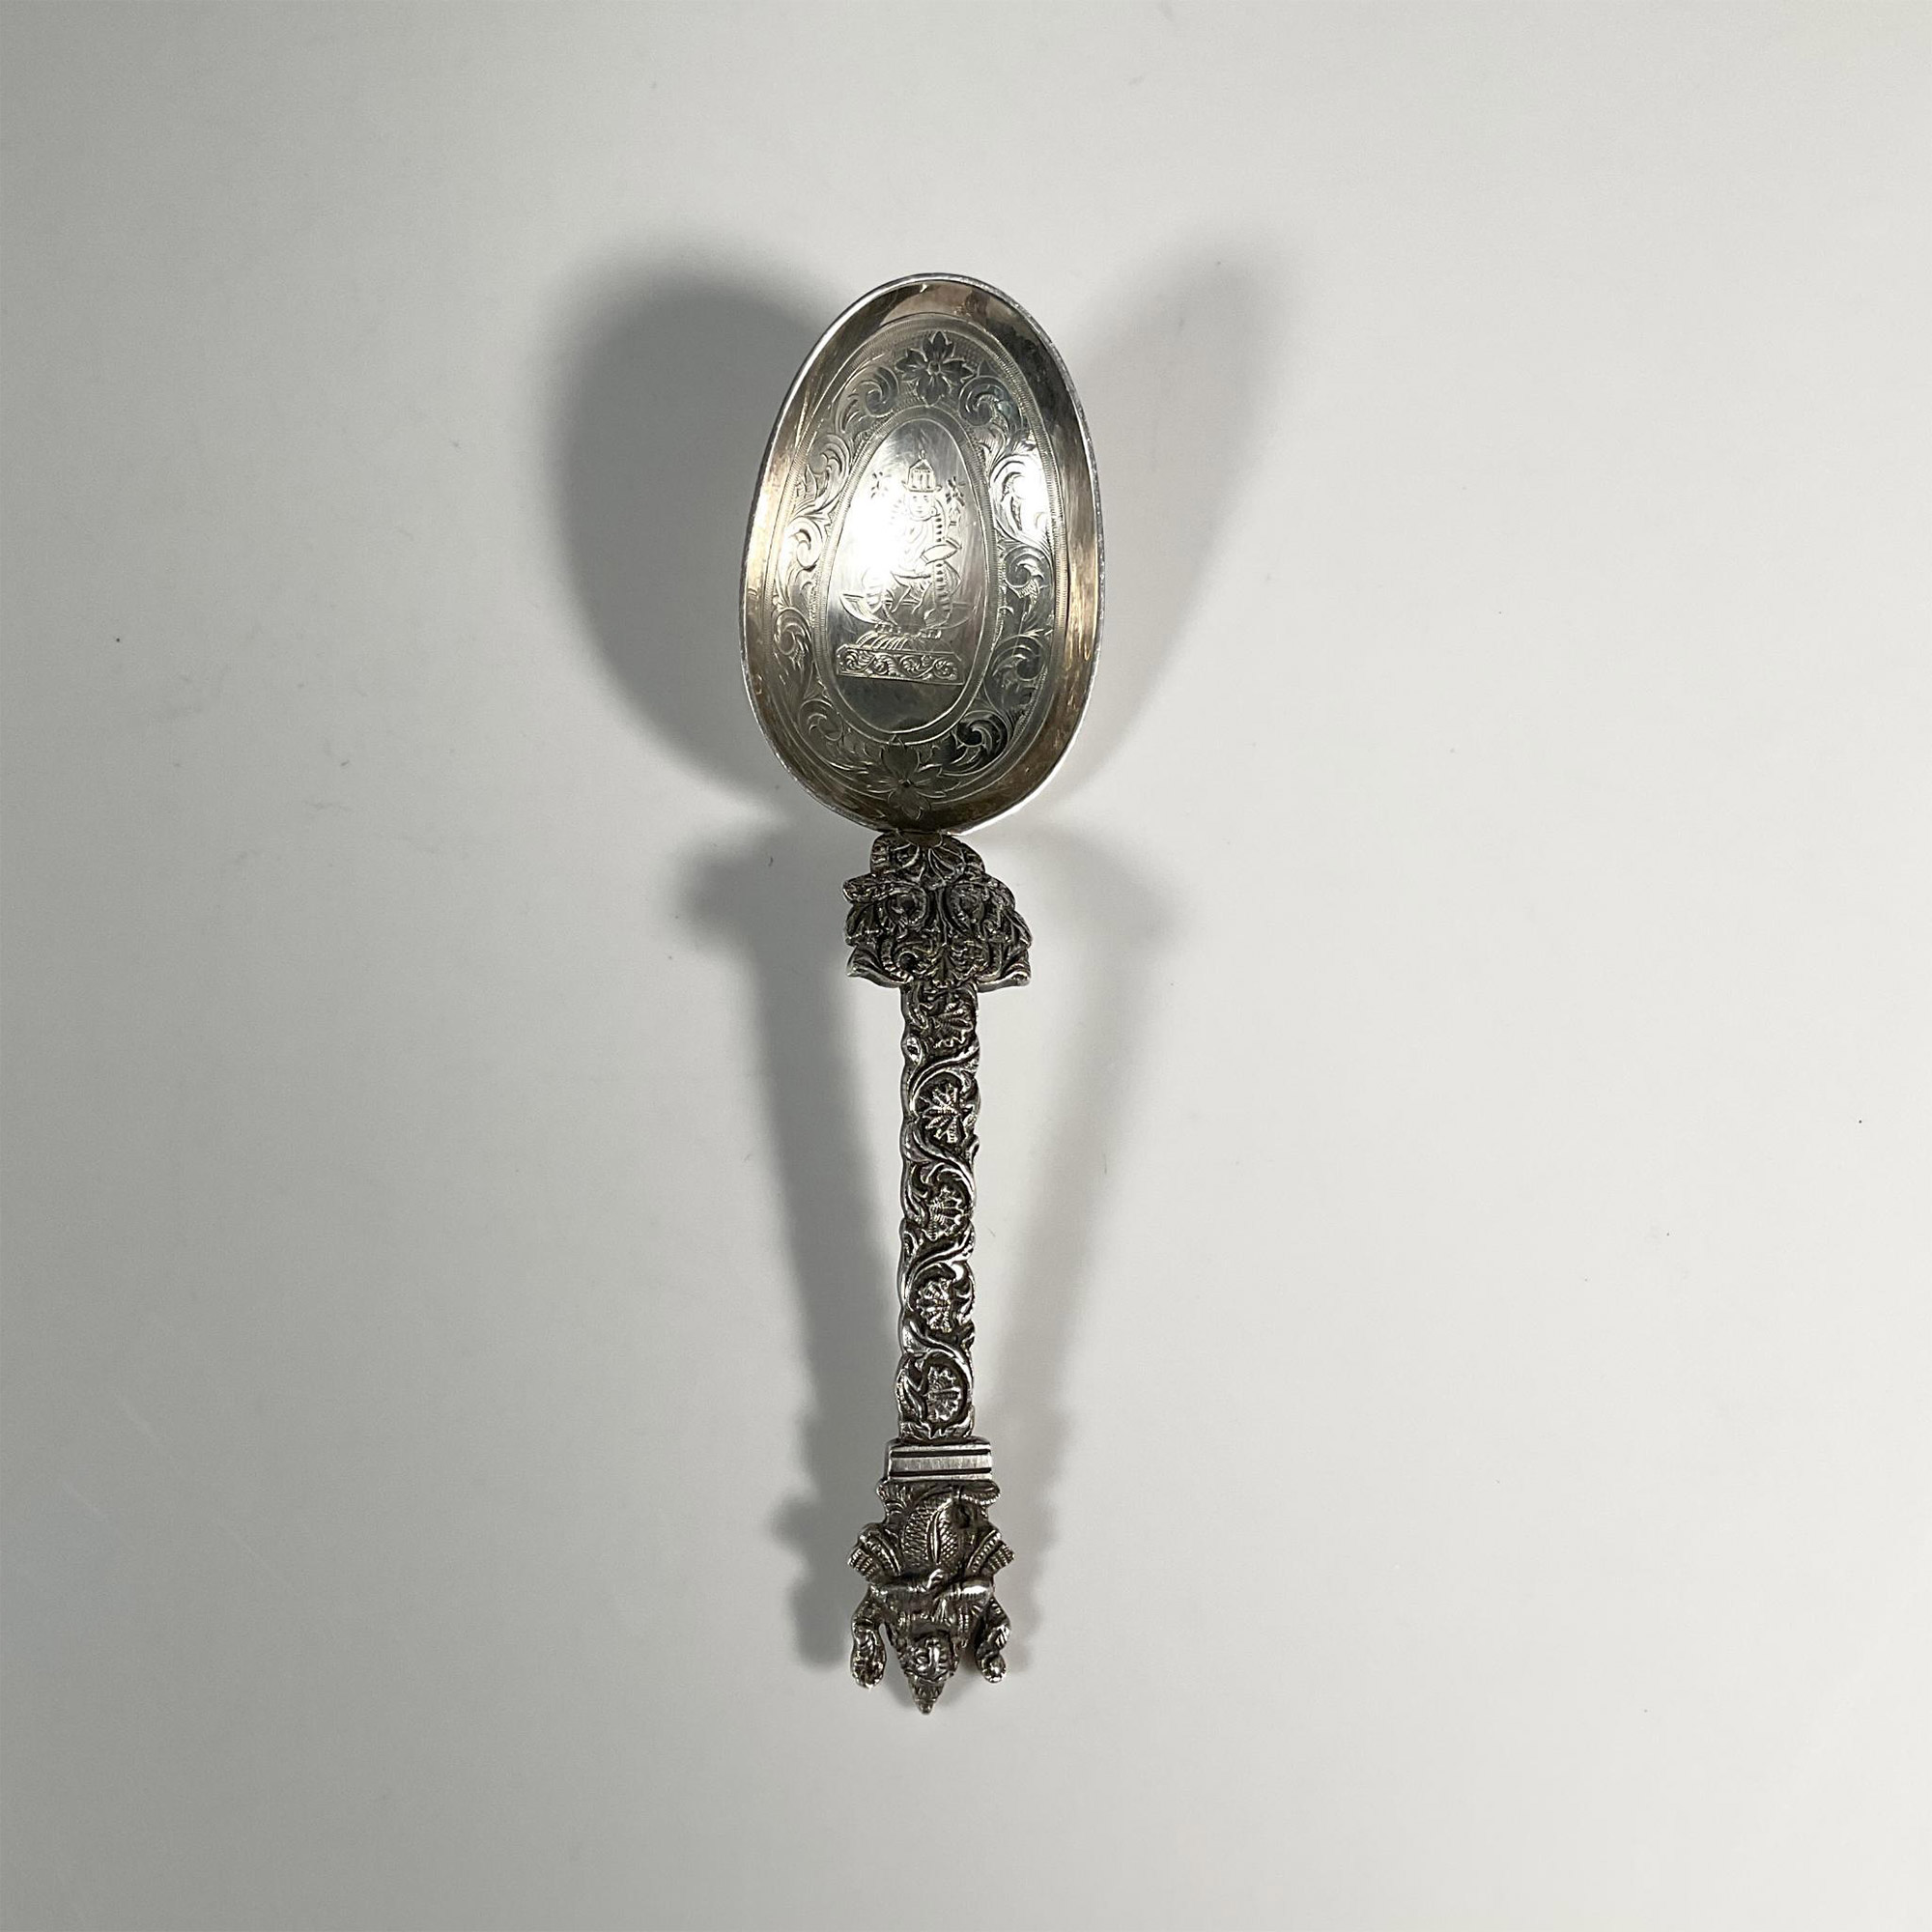 South East Asian Hallmarked Silver Spoon - Image 3 of 3